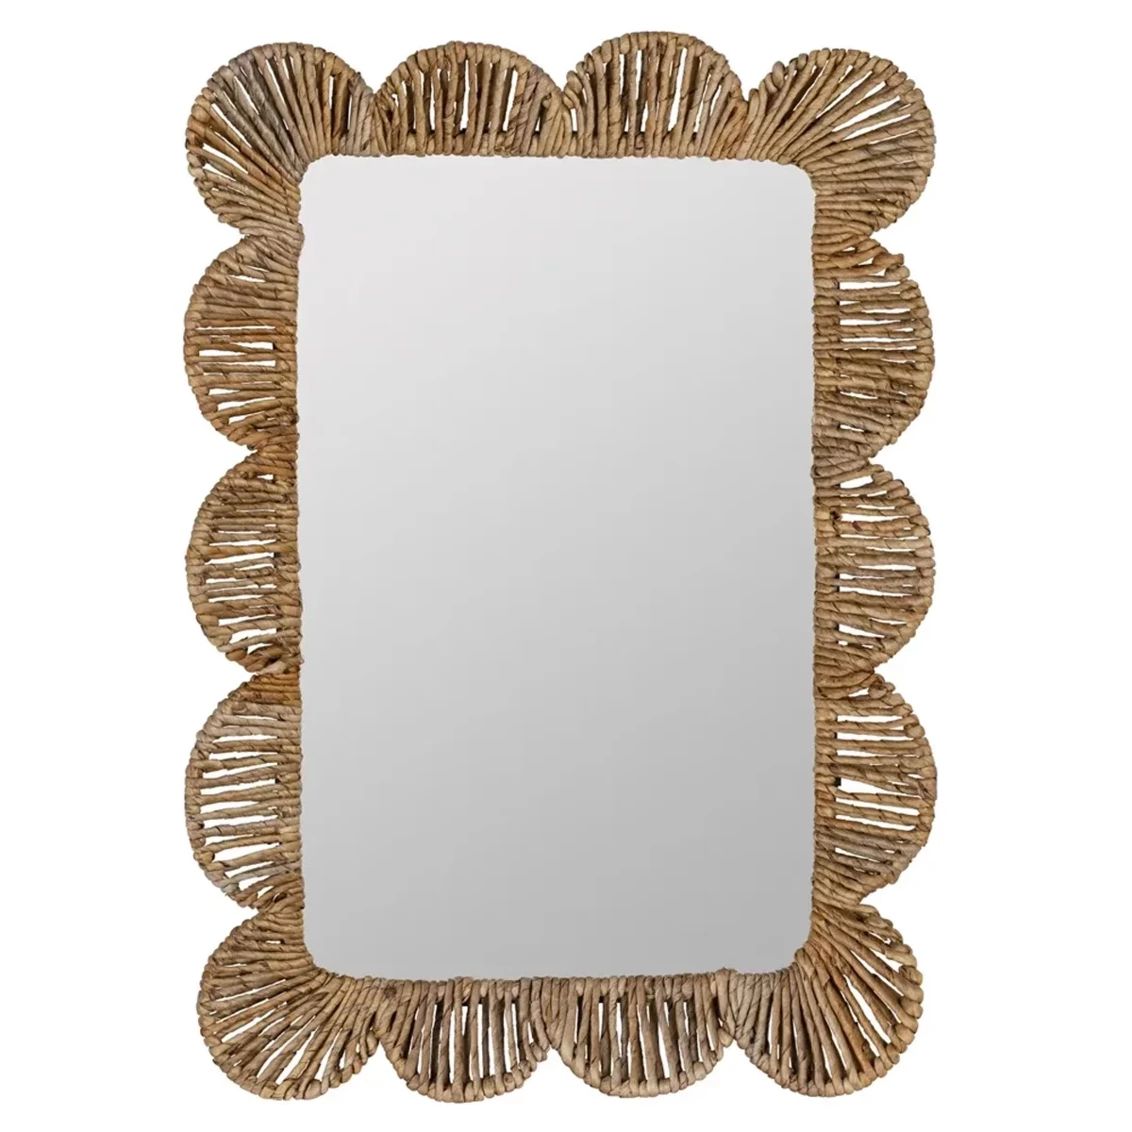 Ainsley Floral Mirror - Rectangular | Shades of Light